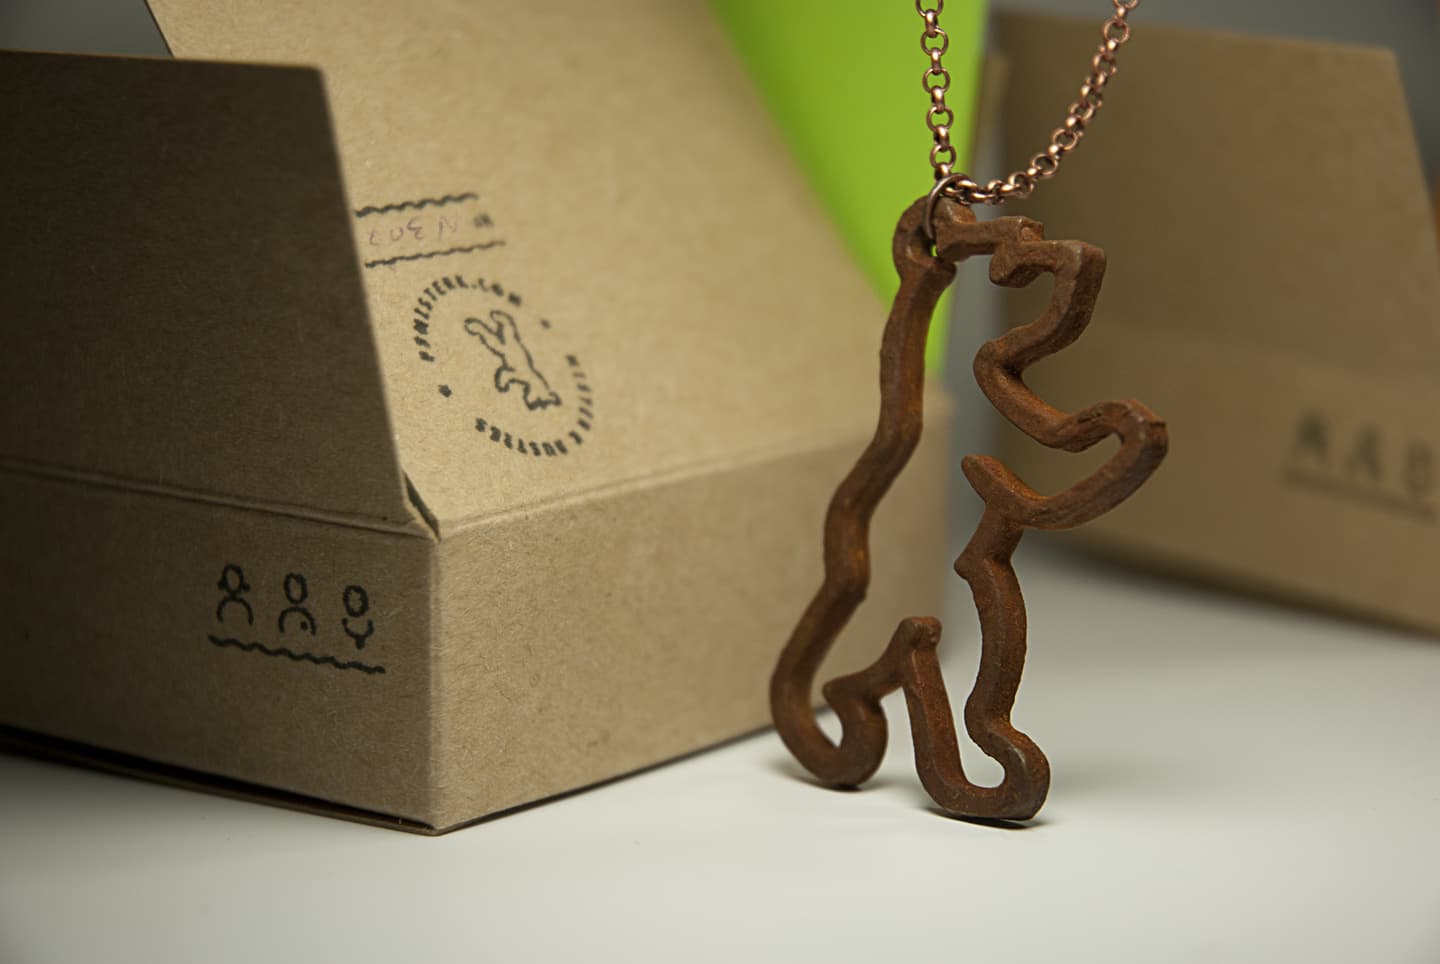 K Rusties are objects based on Mister K typeface, here is the necklece with Berliner bear